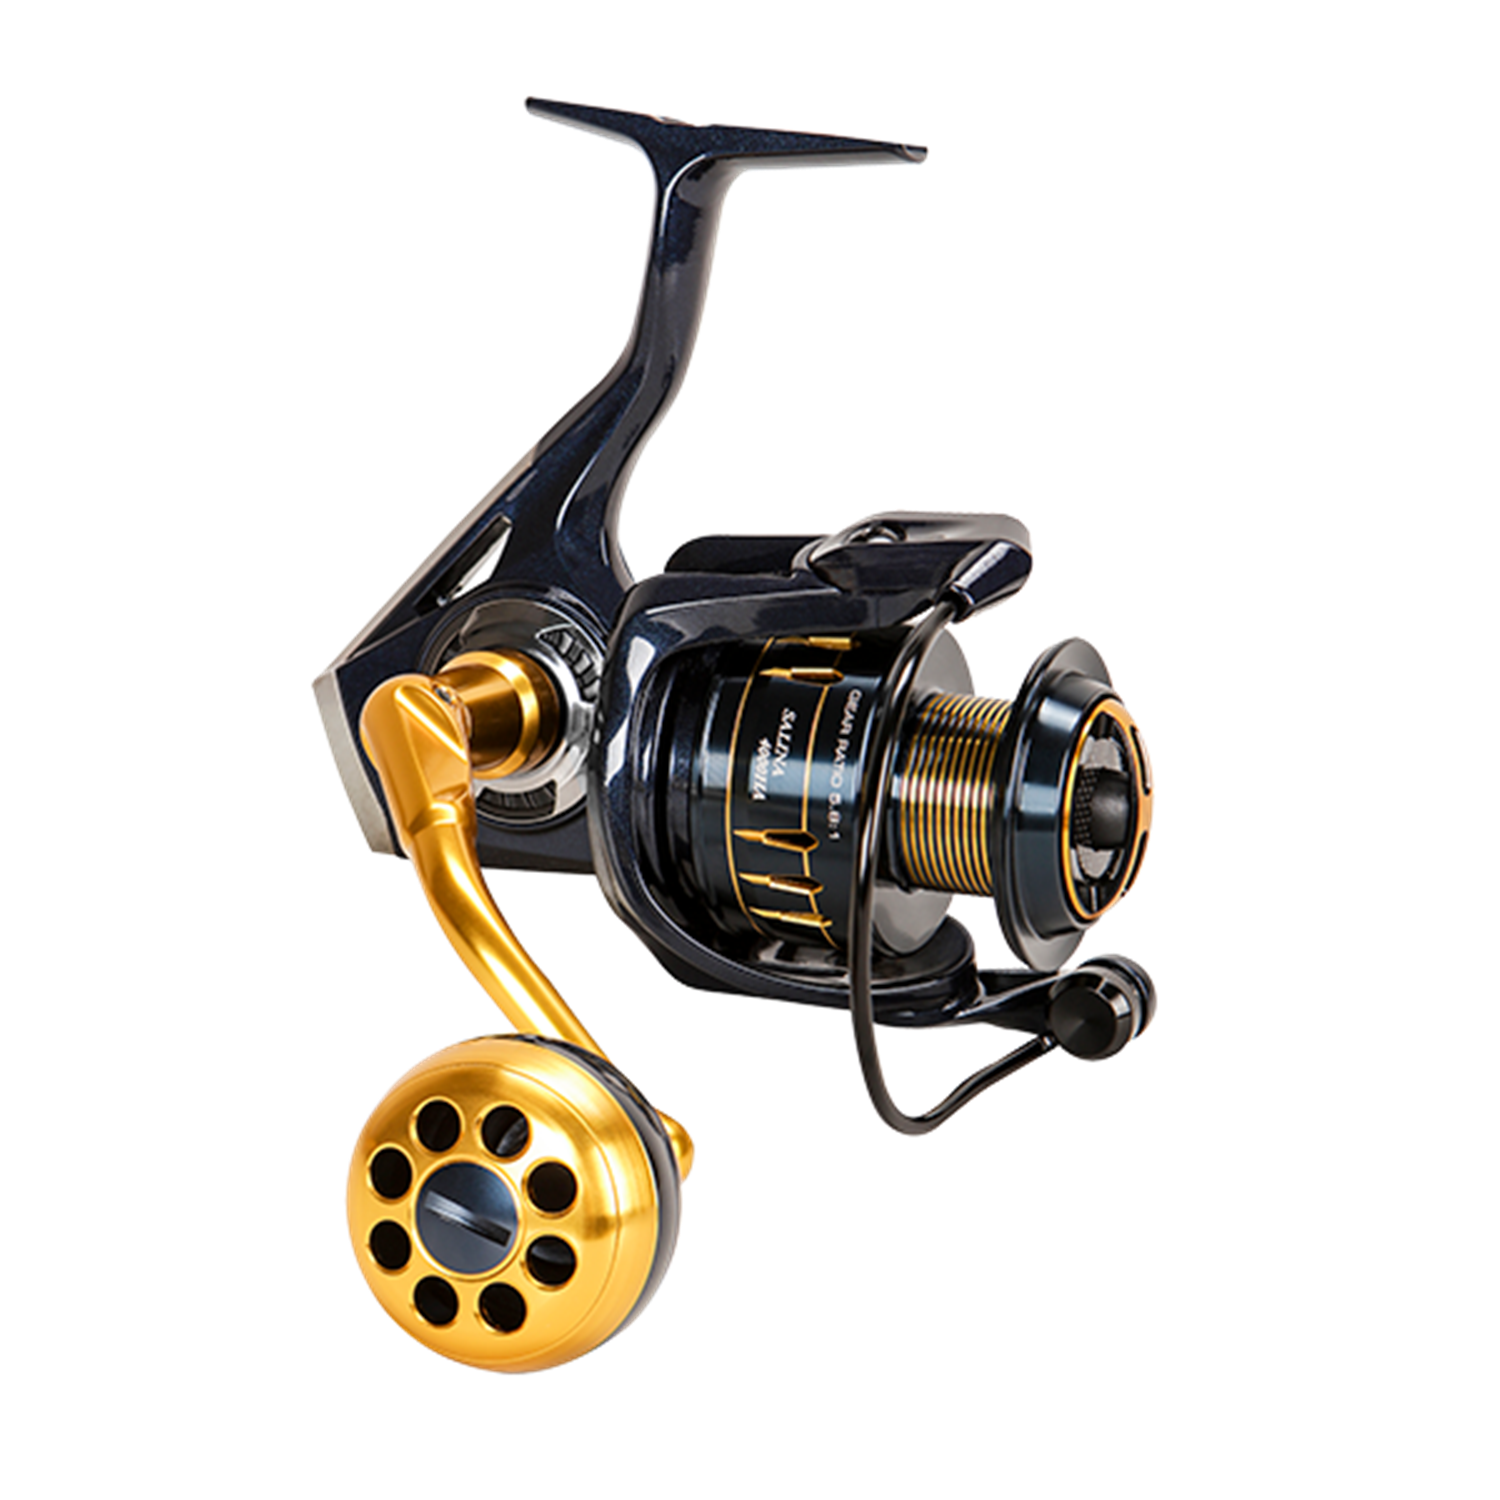 The New Okuma Tesoro Spinning Reel, Dave with Okuma talks about the new  Okuma Tesoro spinning reel that will be available 2023., By Salty Scales